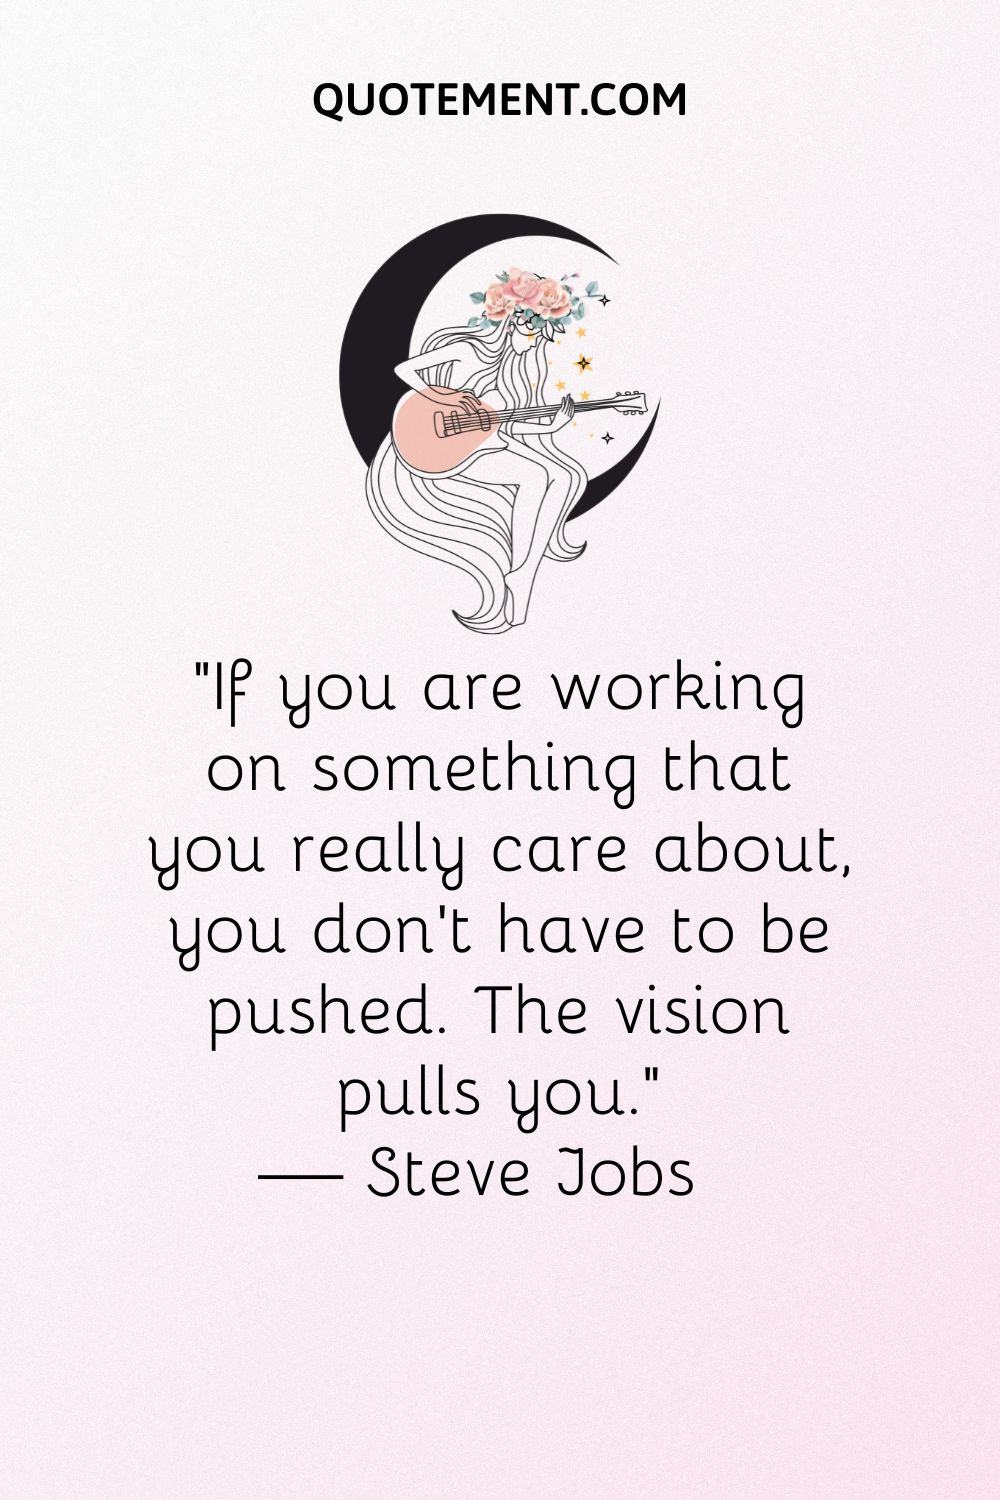 “If you are working on something that you really care about, you don’t have to be pushed. The vision pulls you.” — Steve Jobs